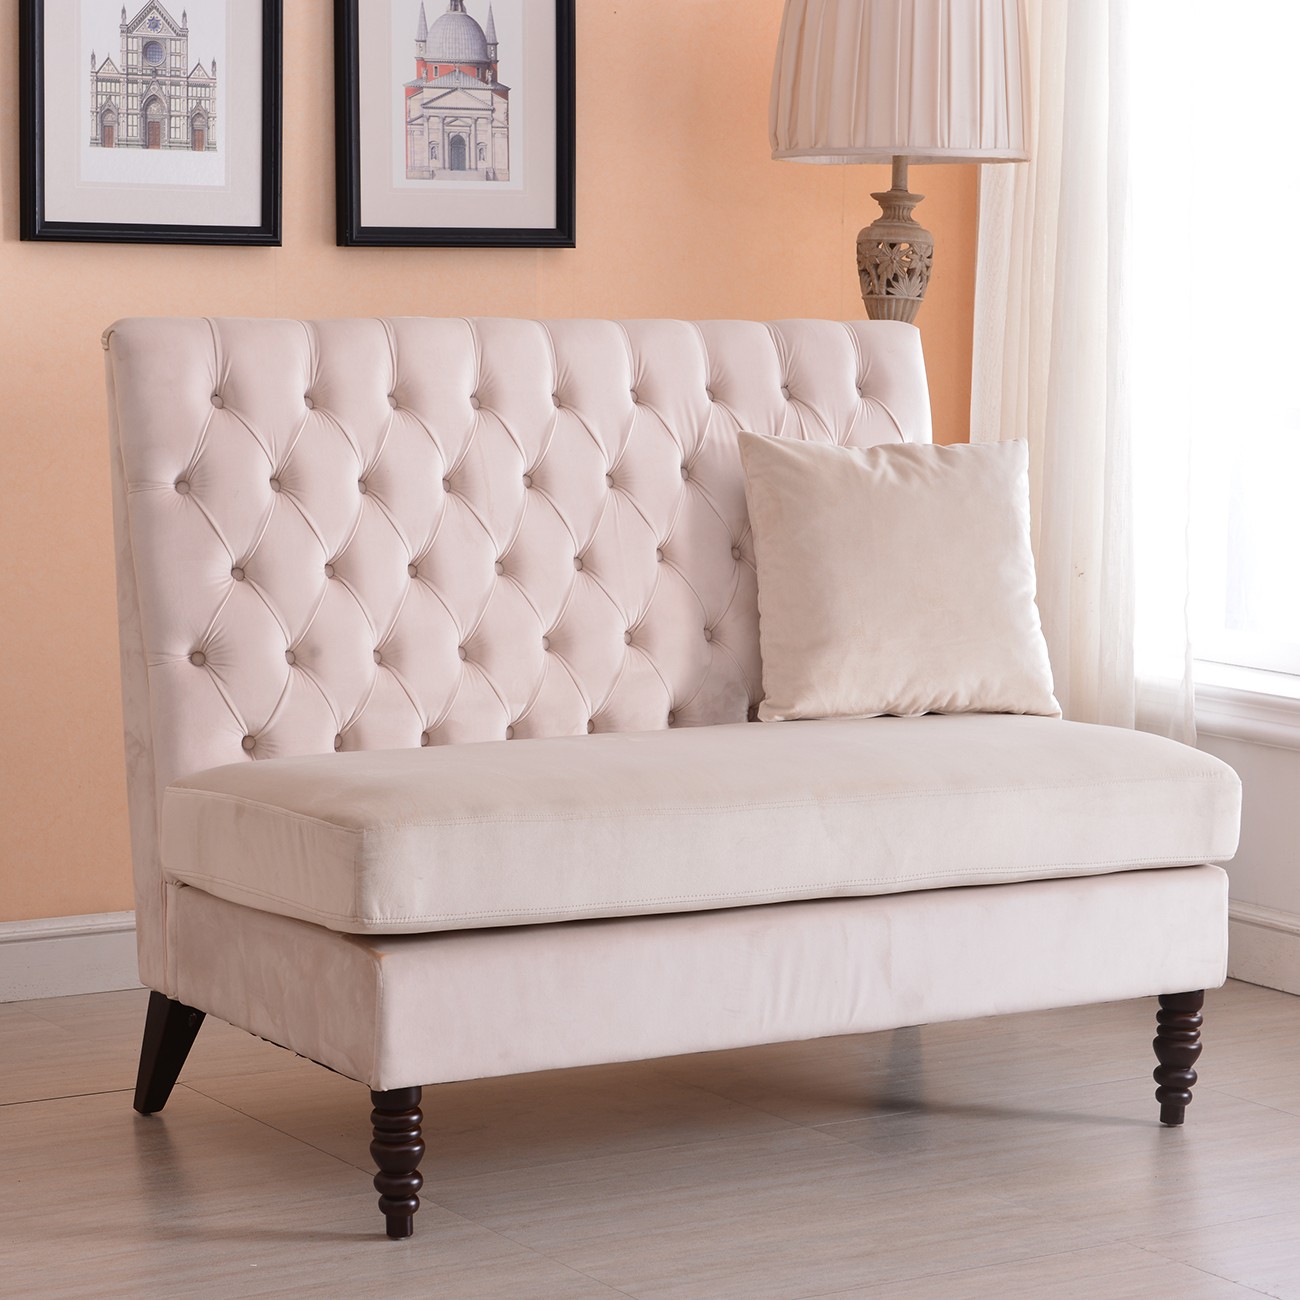 New modern tufted settee bedroom bench sofa high back 5